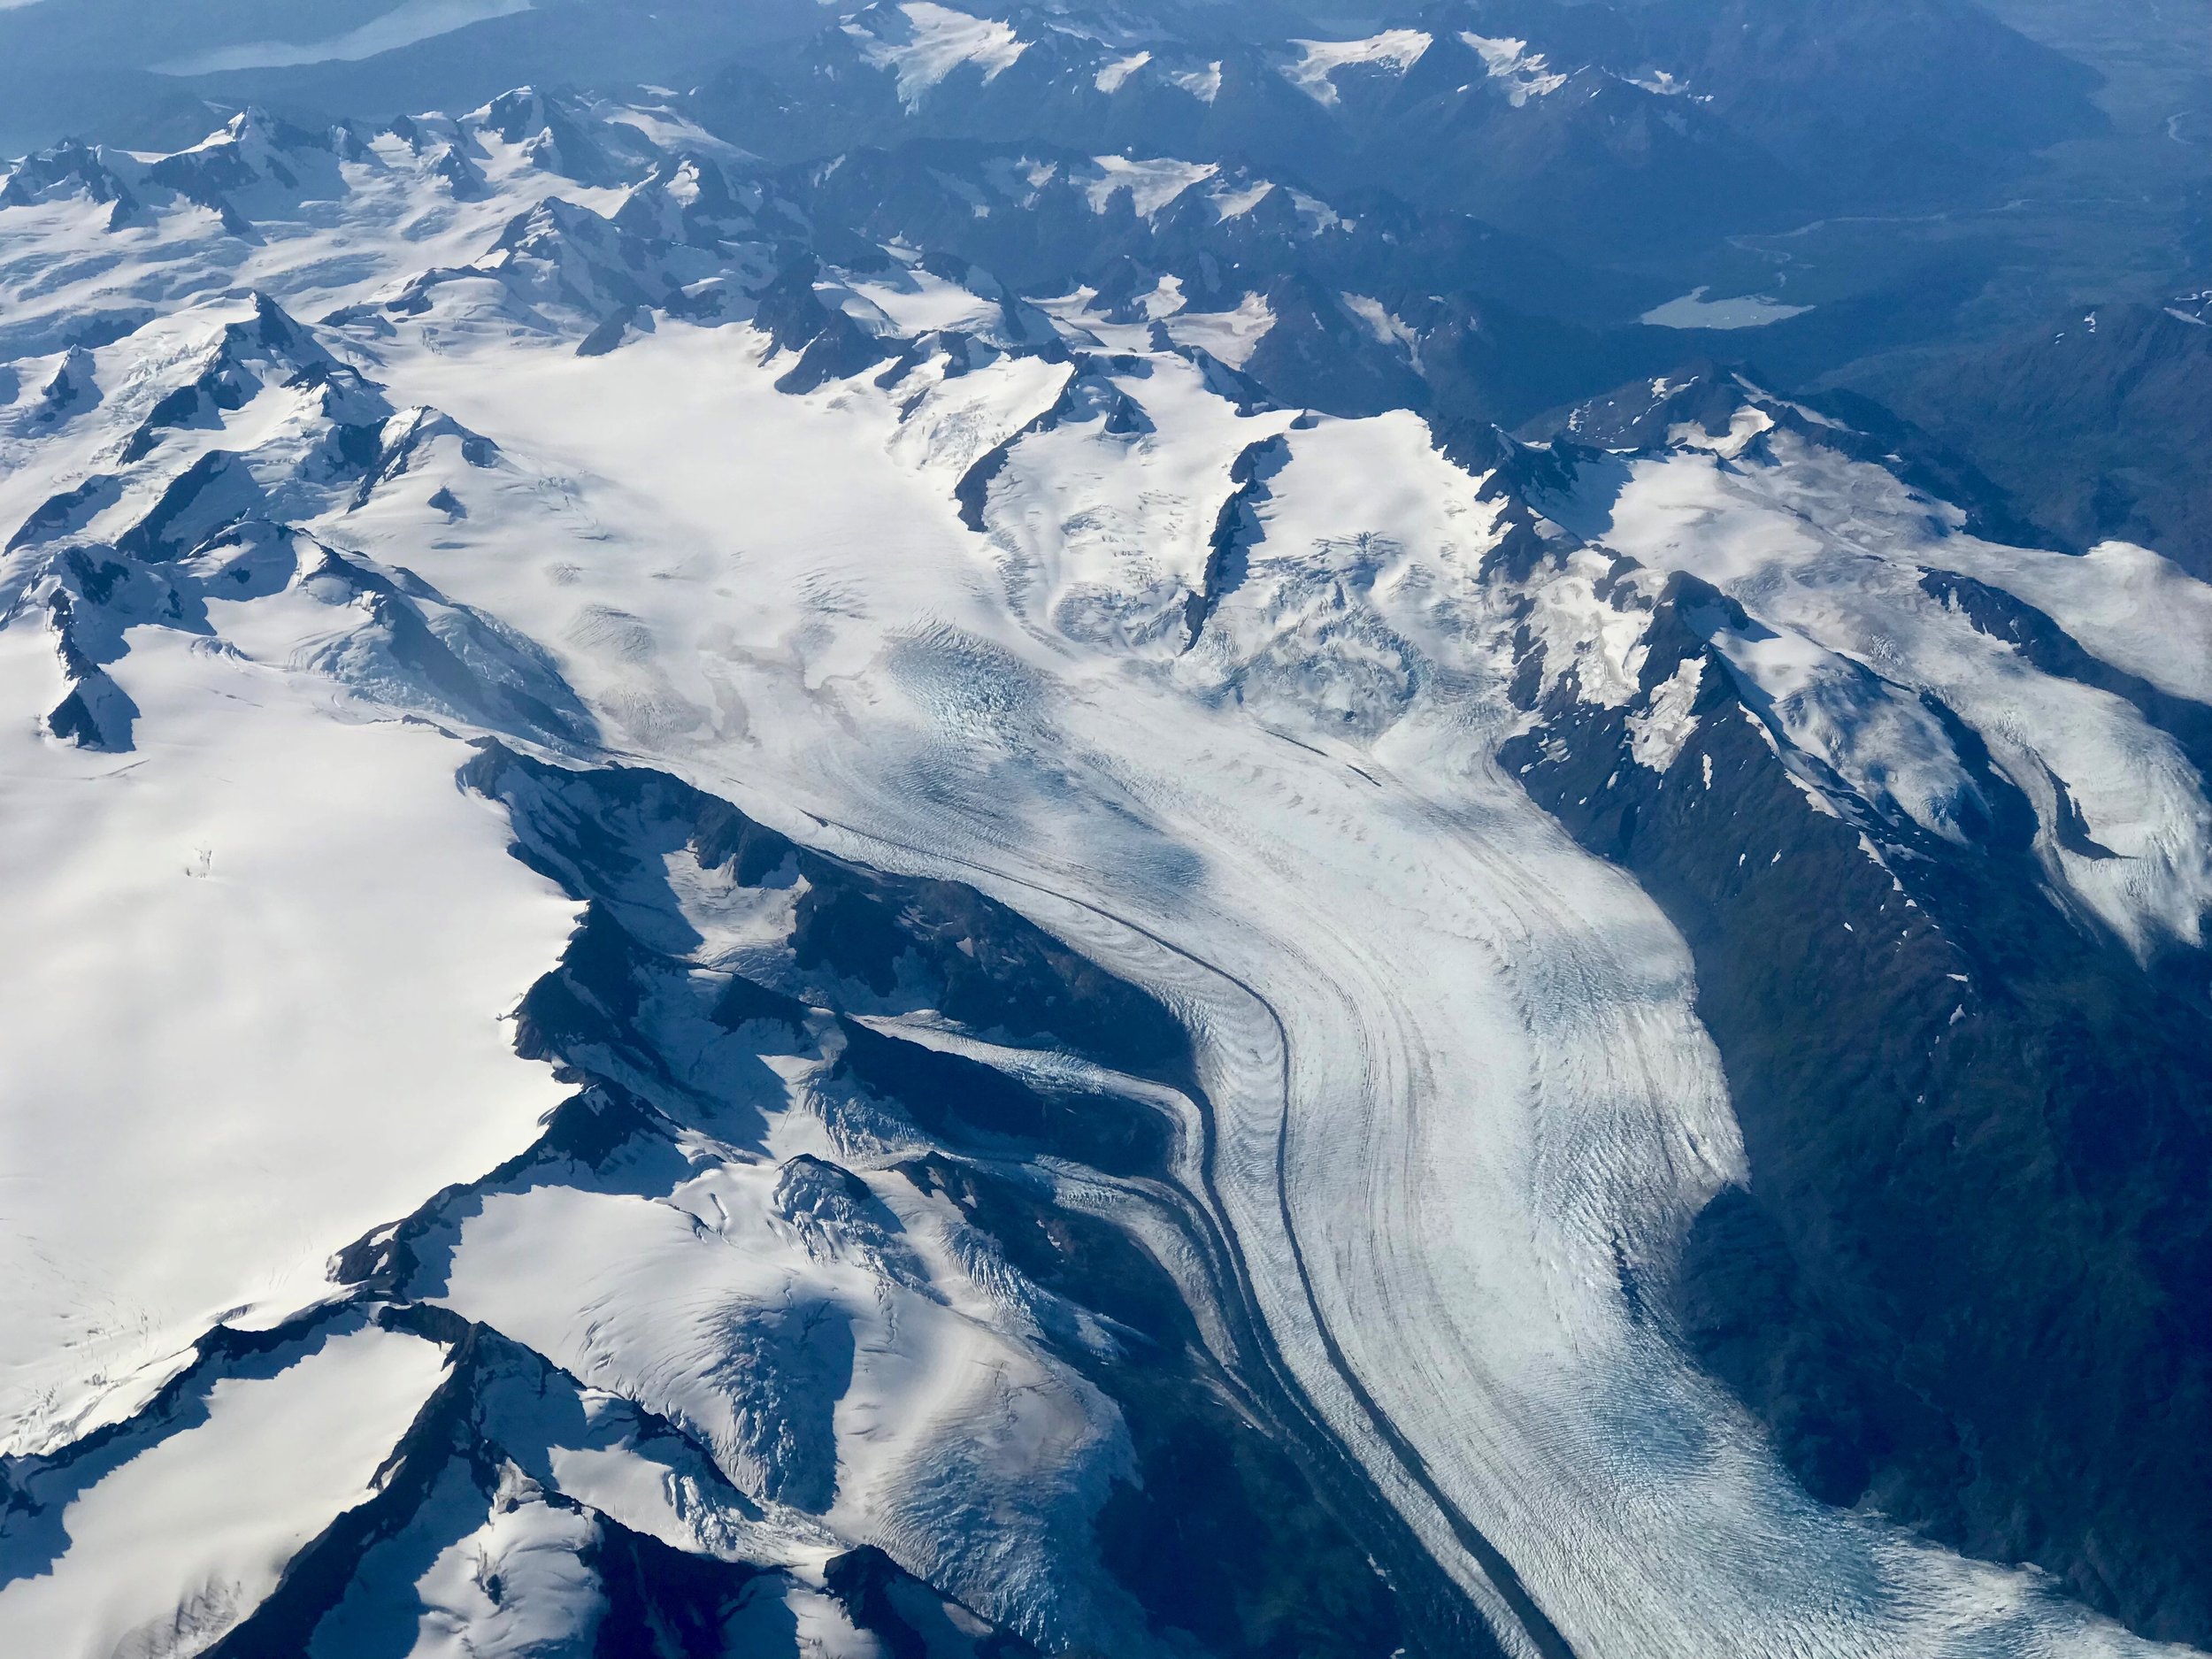  The mountains of Alaska, from the air. 